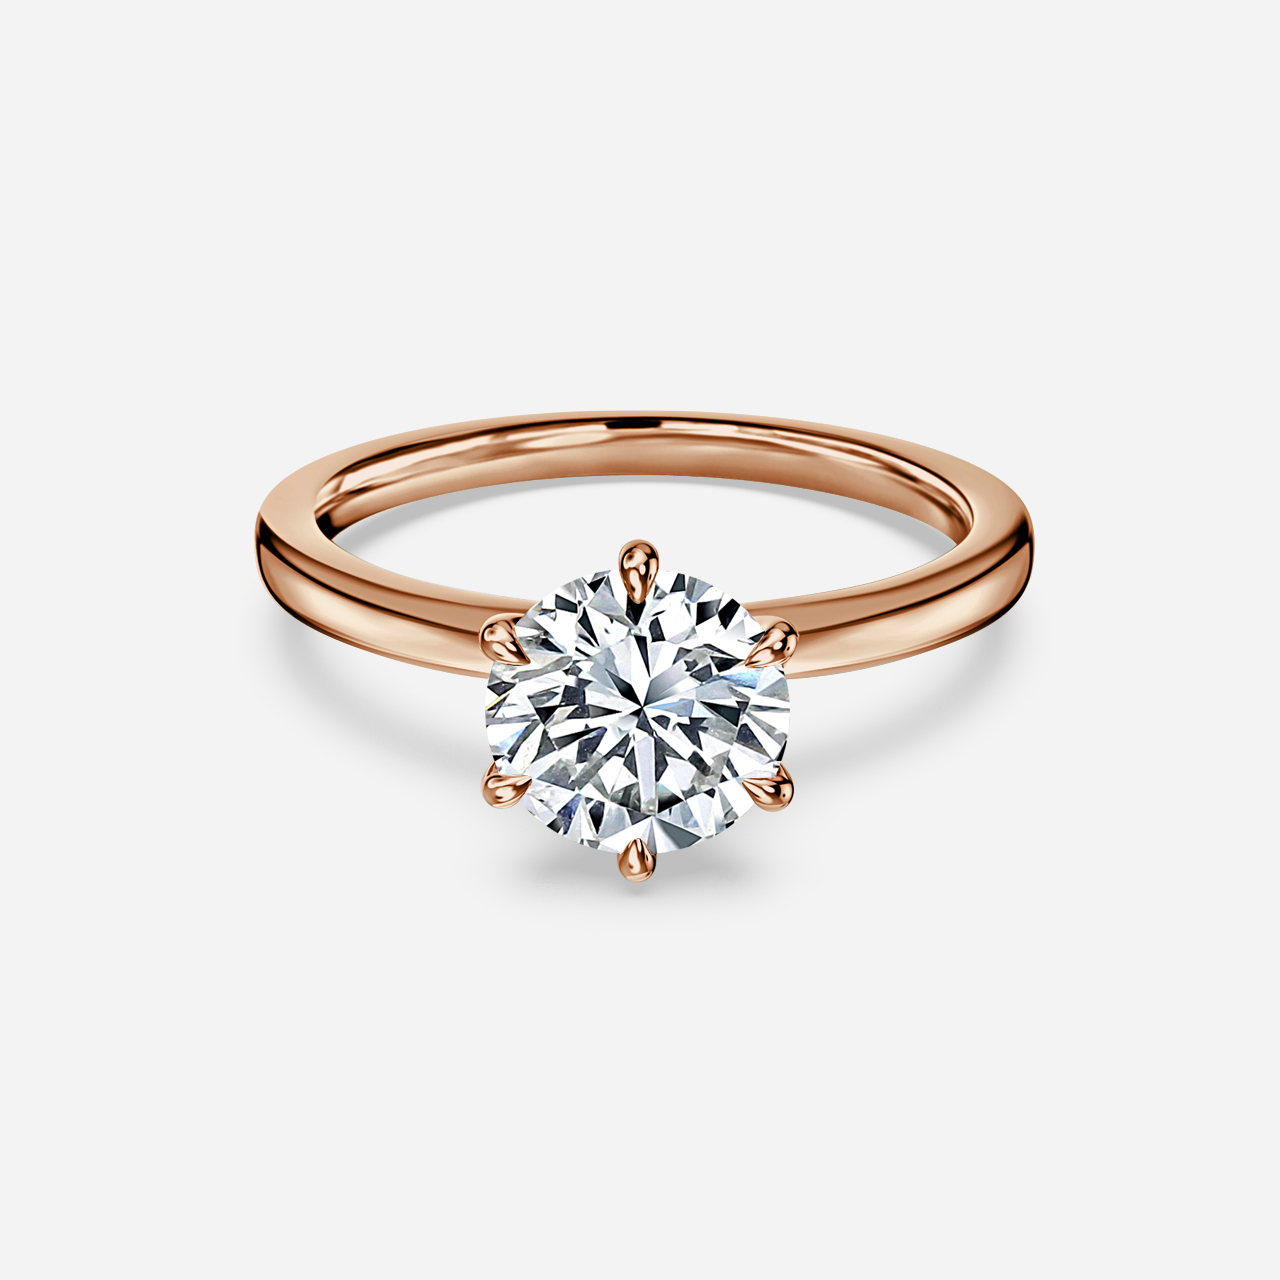 Charlotte Rose Gold Solitaire Engagement Ring